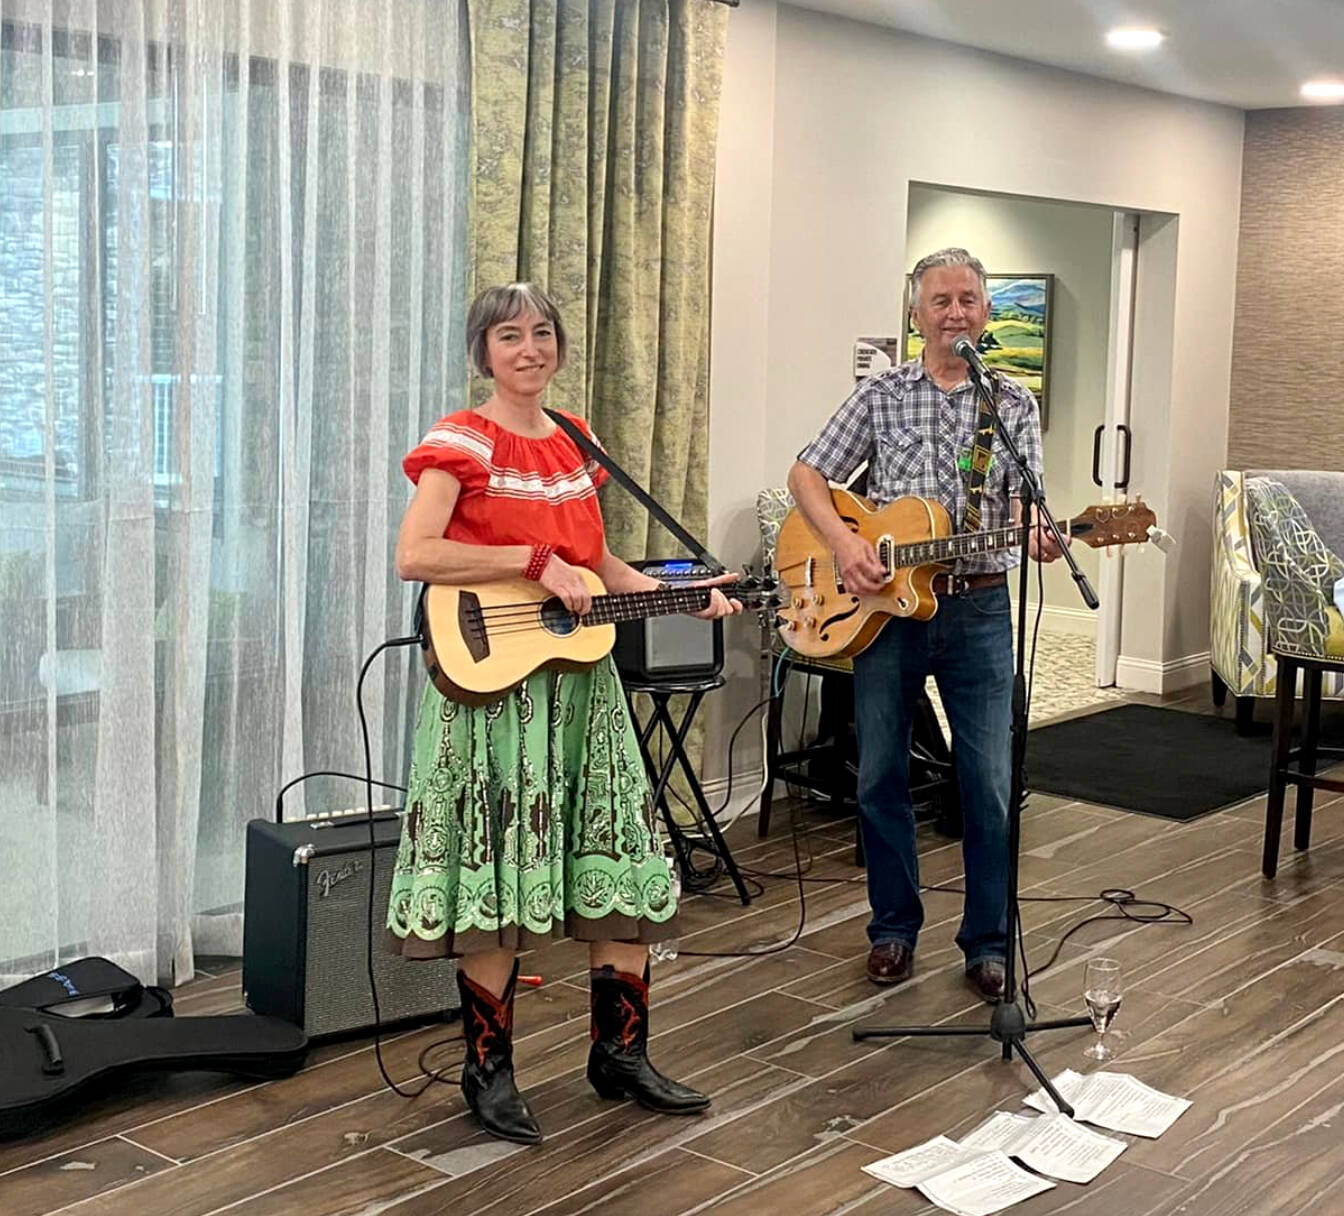 The Honky Tonk Sweethearts performed as part of Father’s Day brunch at Cadence at Kent Meridian. Since opening June 6, there have been a wide range of opportunities to build community and learn new skills.